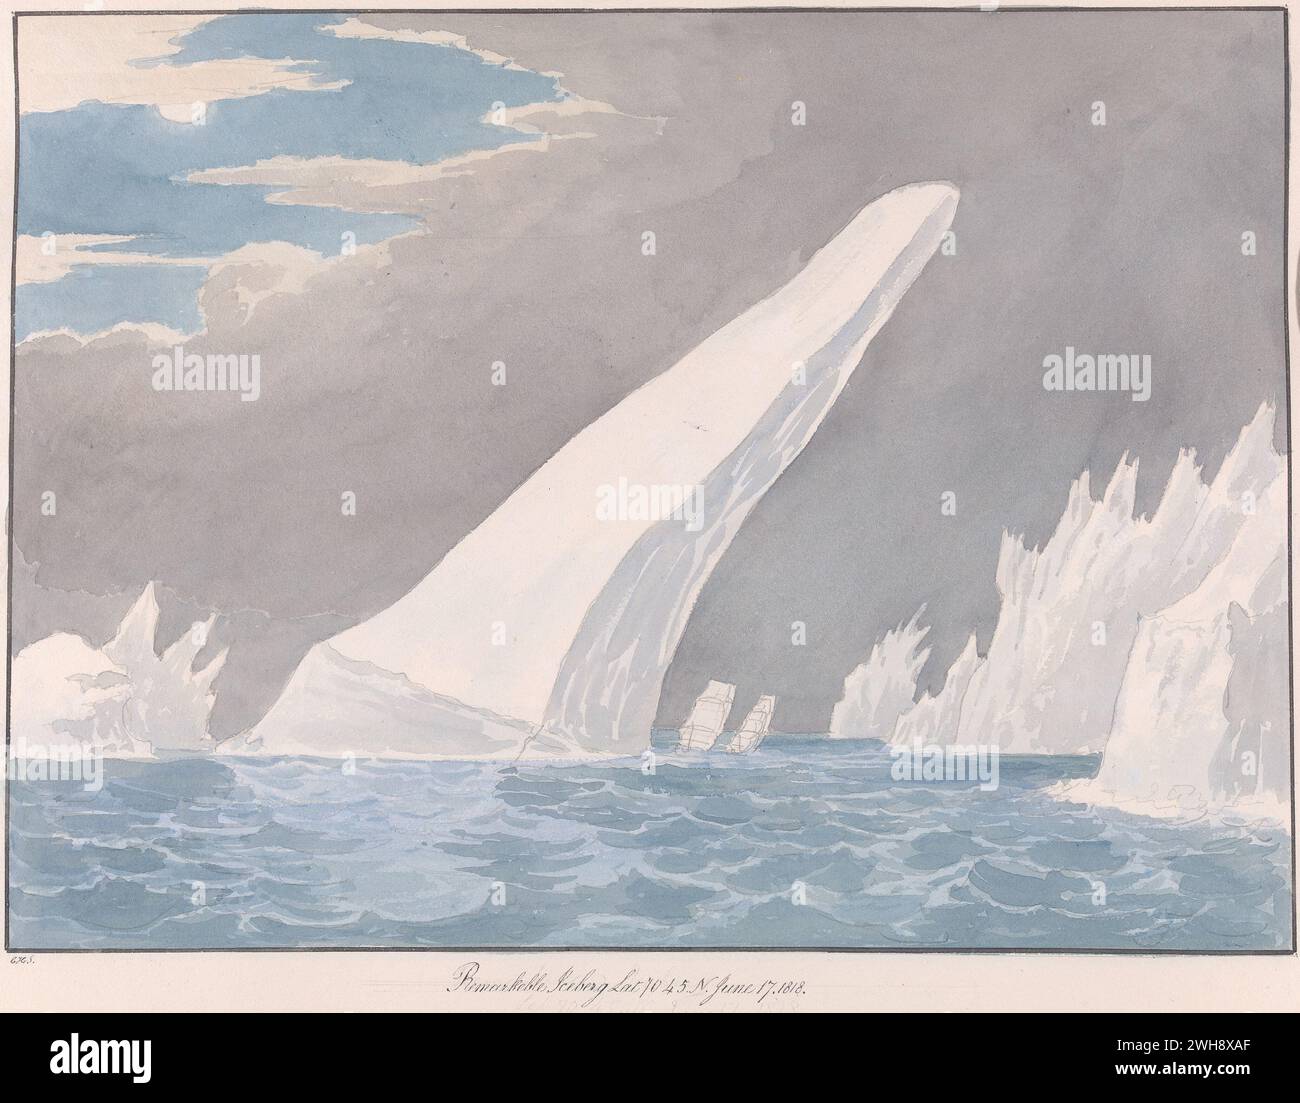 'Remarkable Iceberg' from the book 'Views of Polar Regions' by Charles Hamilton Smith, Belgian, undated, Watercolor and graphite on moderately thick, moderately textured, cream wove paper, Stock Photo